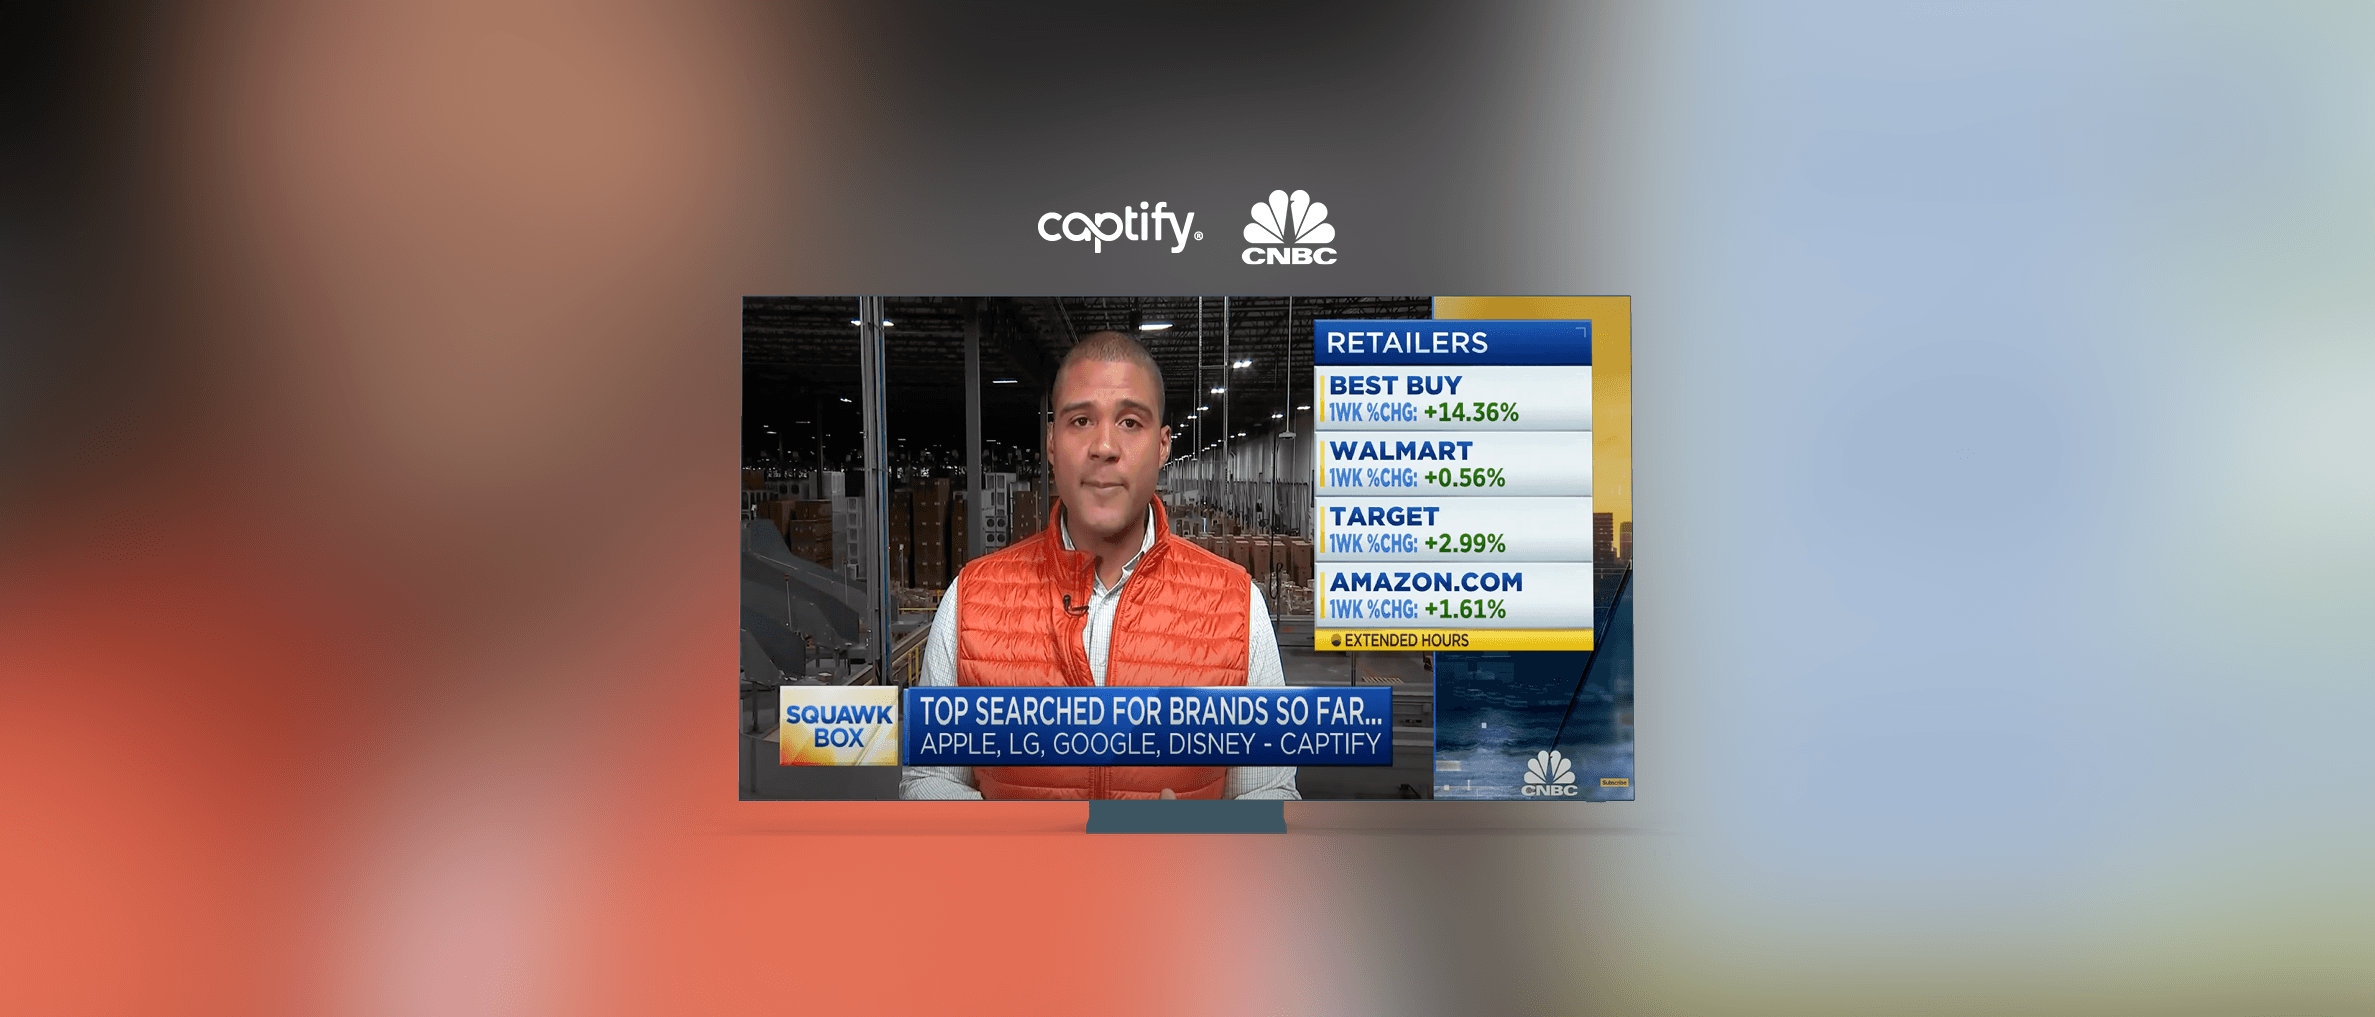 Captify’s Search-Powered Black Friday and Cyber Monday Insights Live On CNBC for a Sixth Year